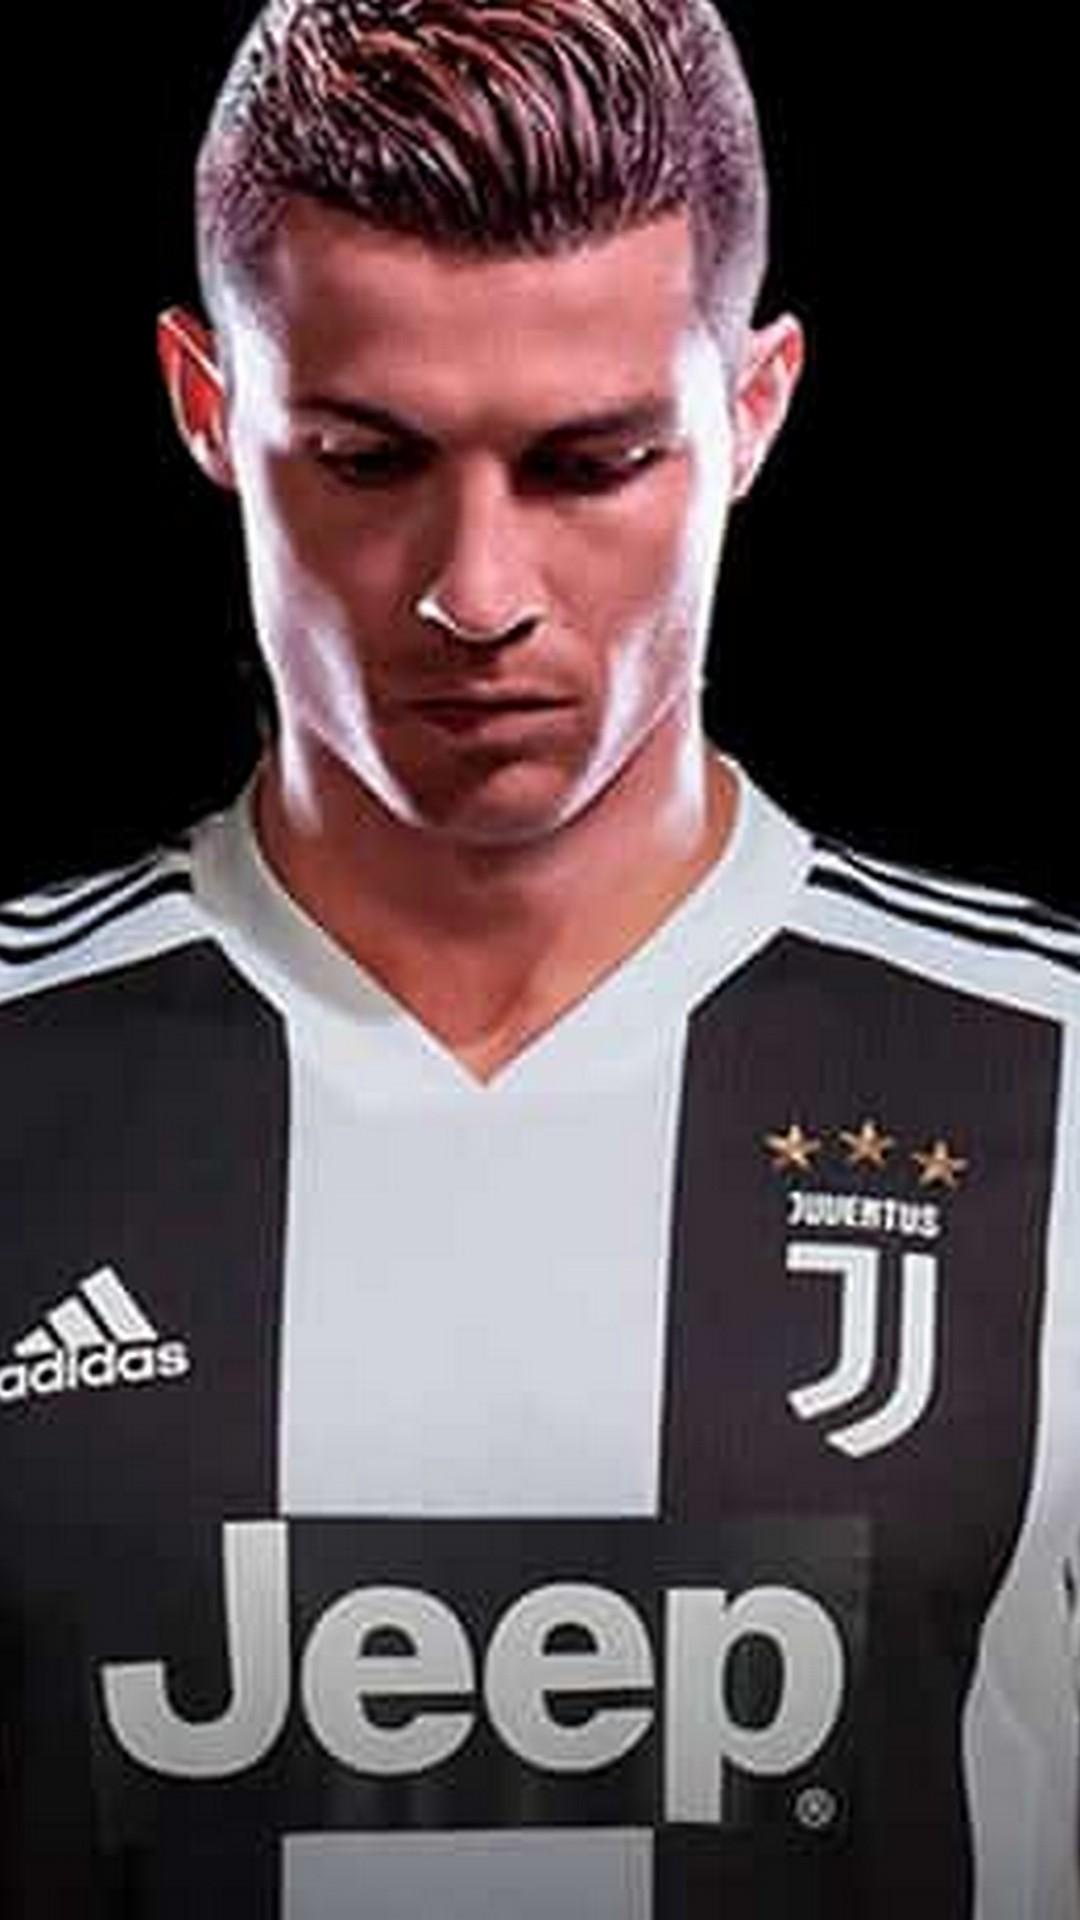 Cristiano Ronaldo Juventus Wallpapers Iphone With Image